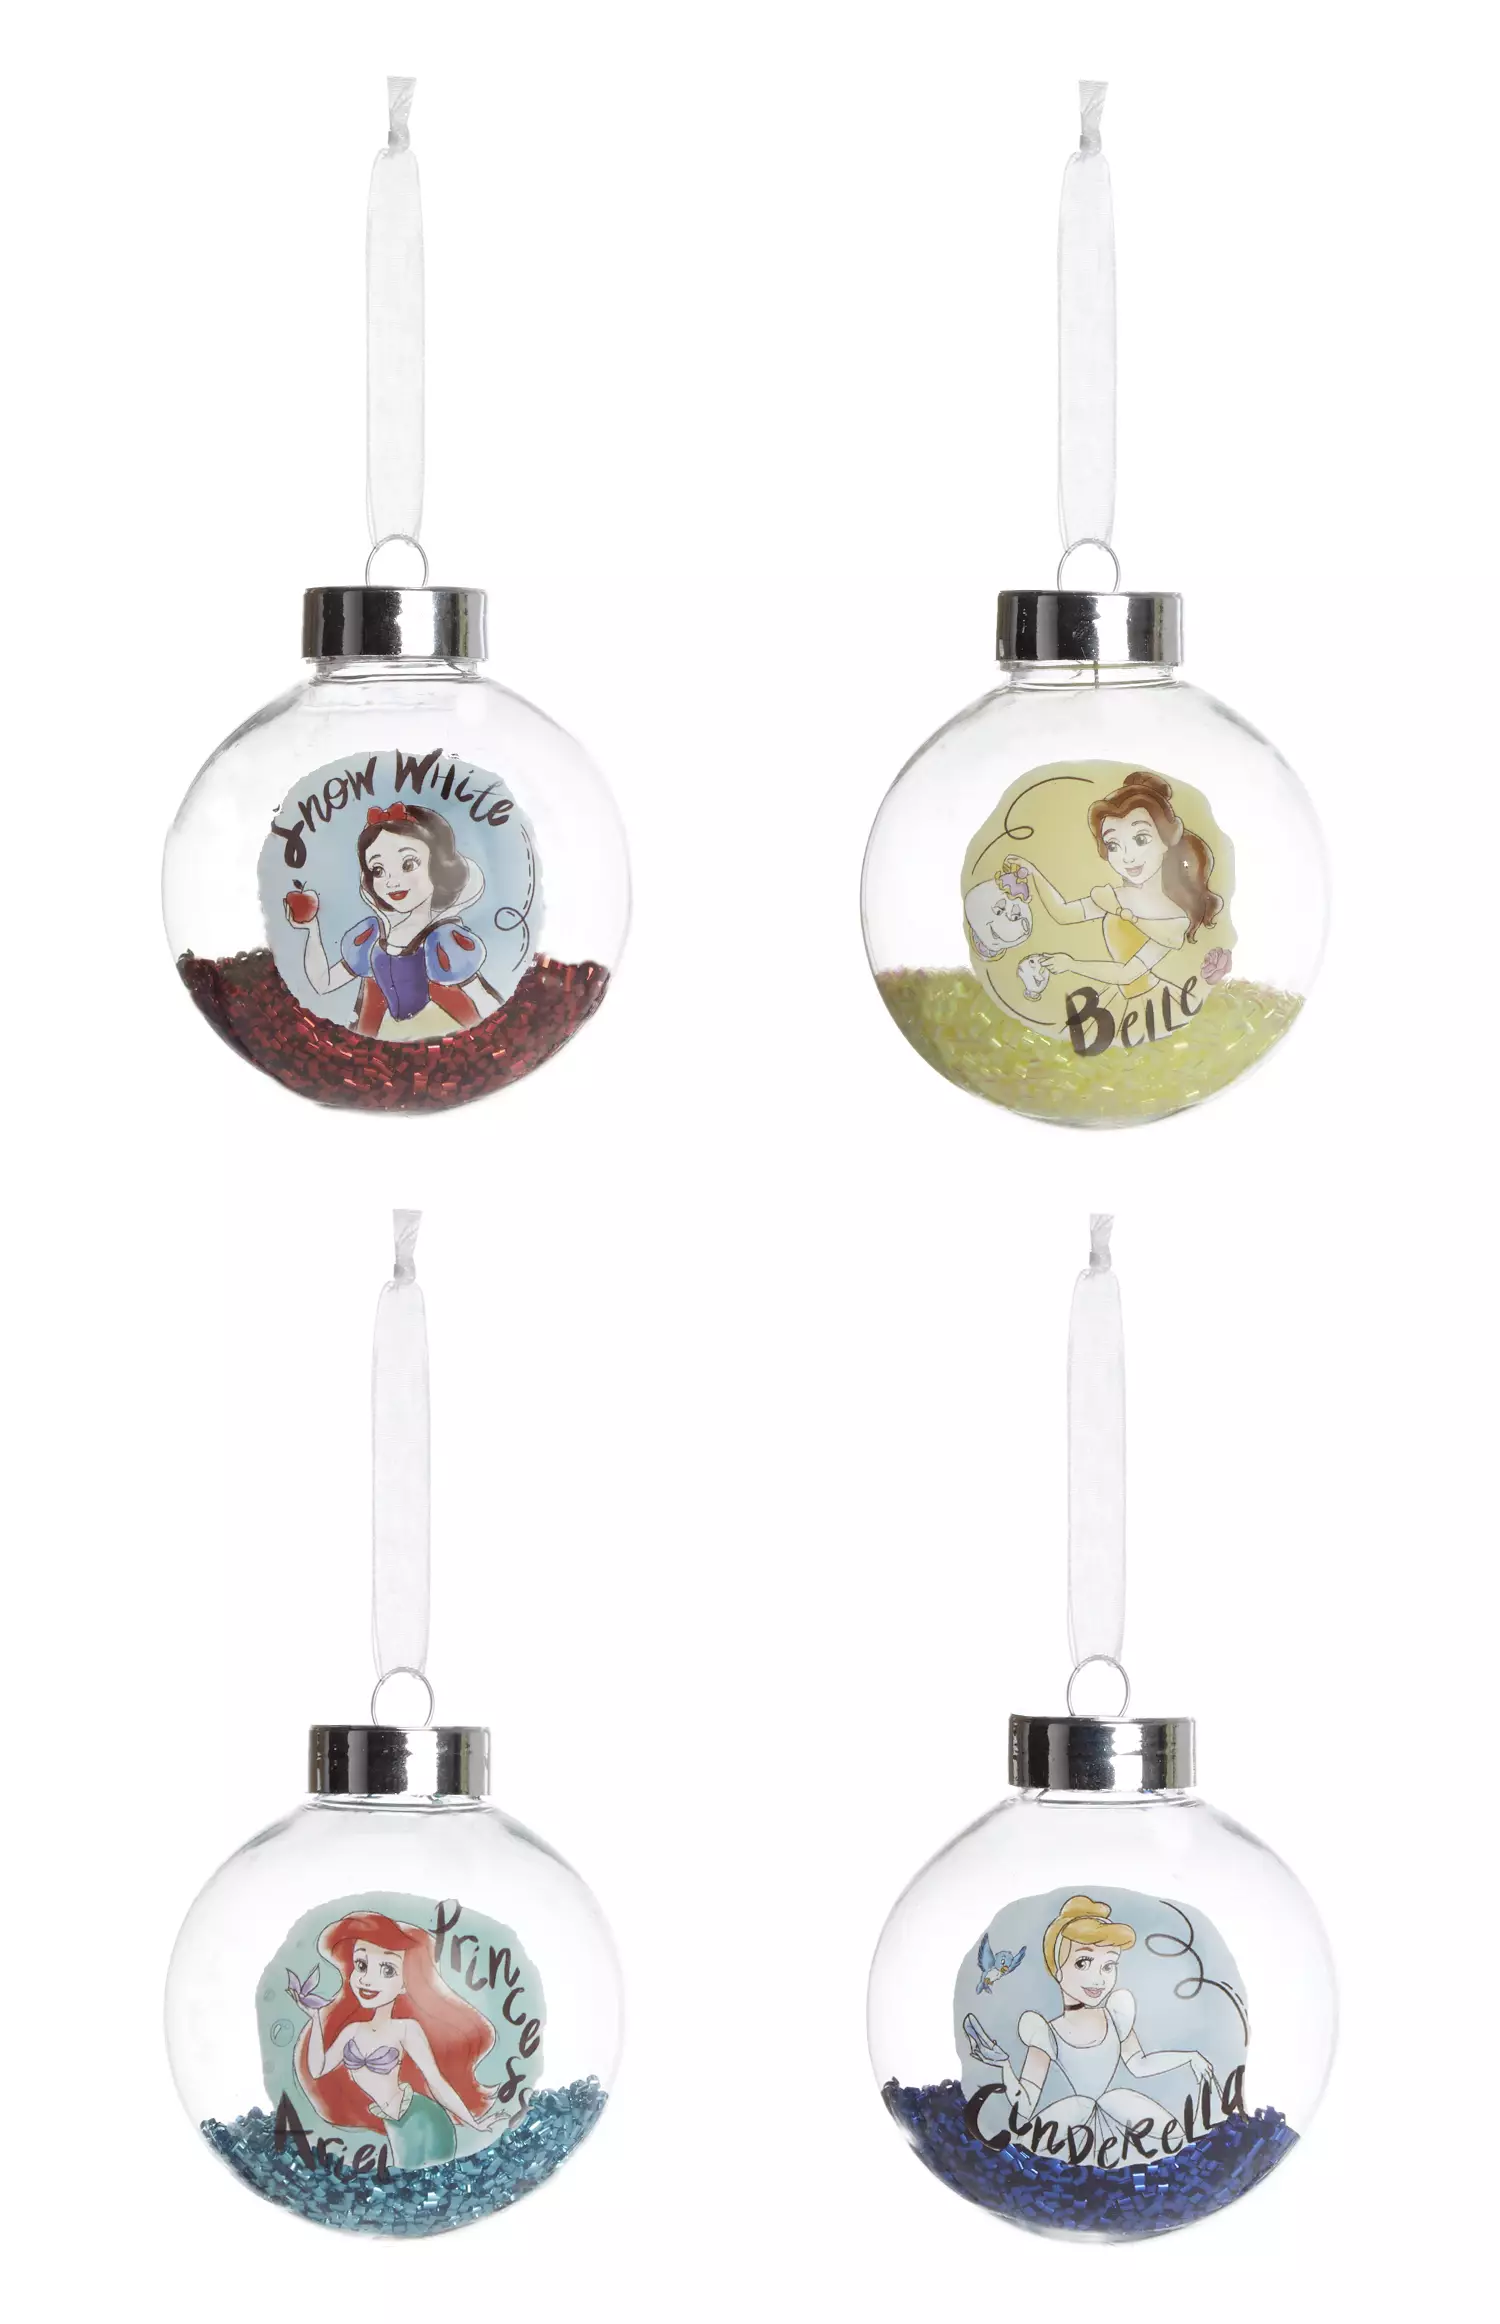 Disney Princesses including Snow White, Ariel, Cinderella and Belle all get their own baubles (